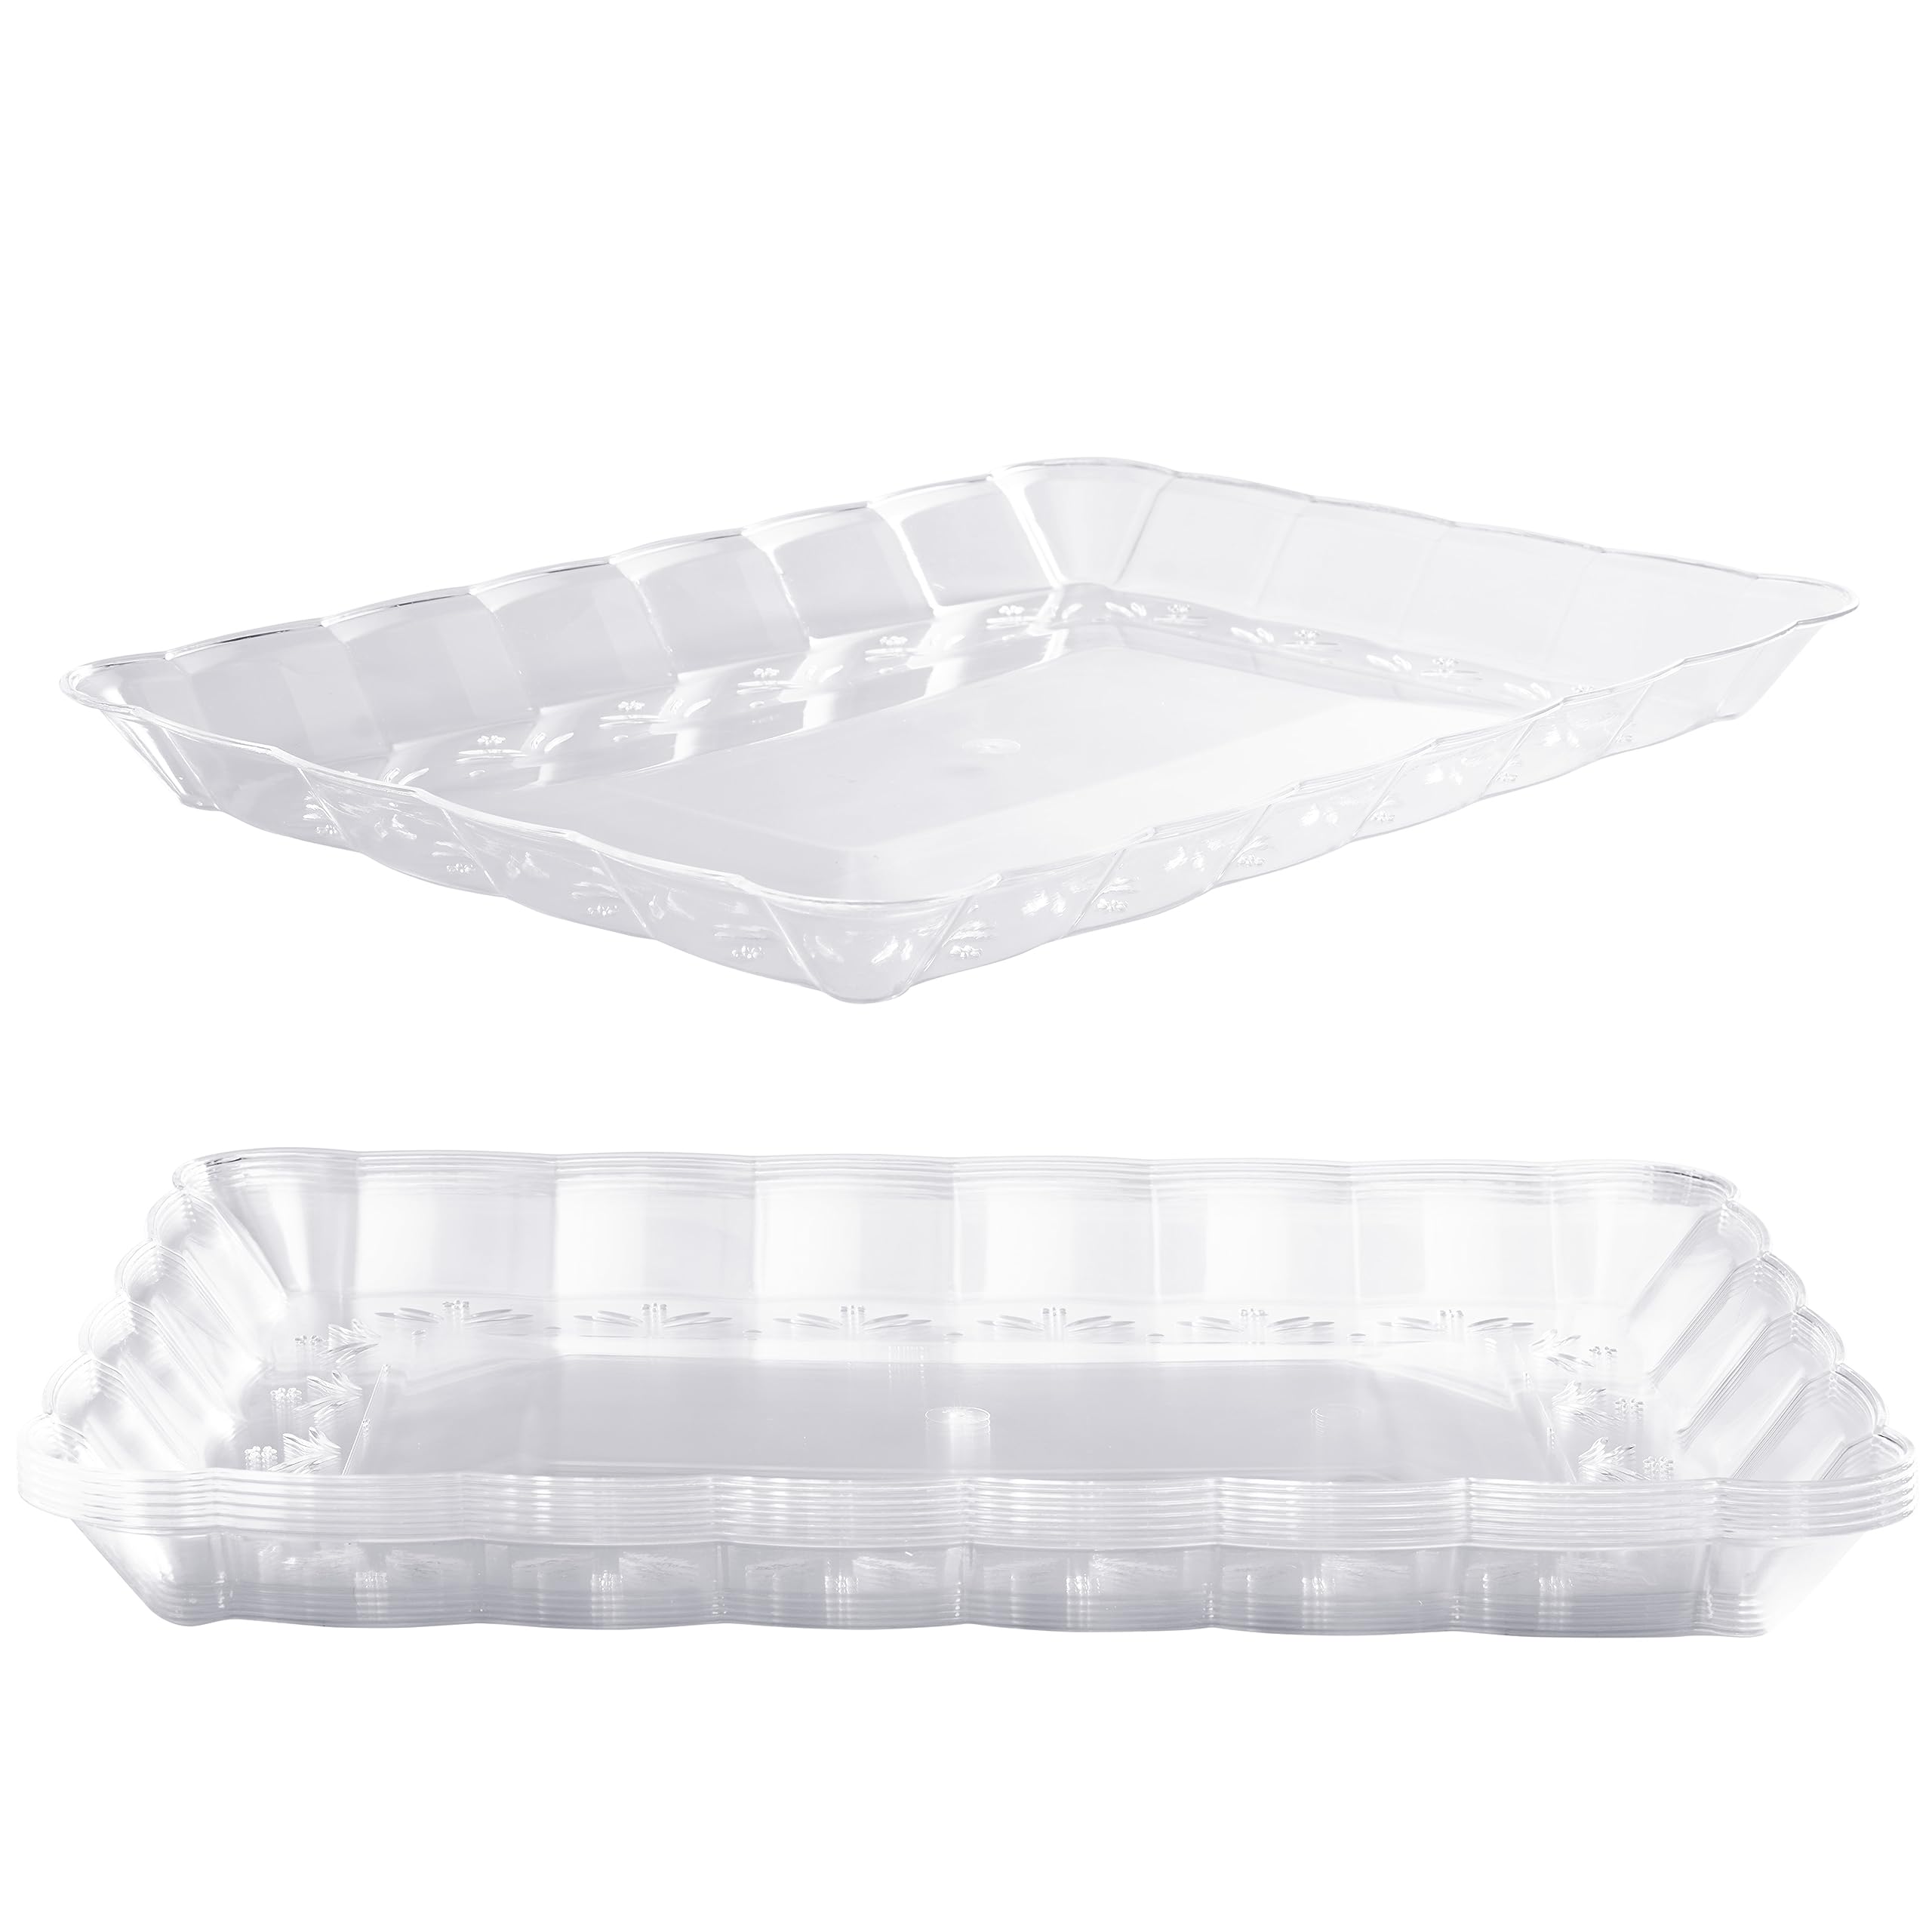 MATANA 6 Large Clear Plastic Serving Tray - 13" x 9" Inch Rectangle Disposable Serving Platters, Party Dish Food Trays for Parties, BPA-Free, Reusable